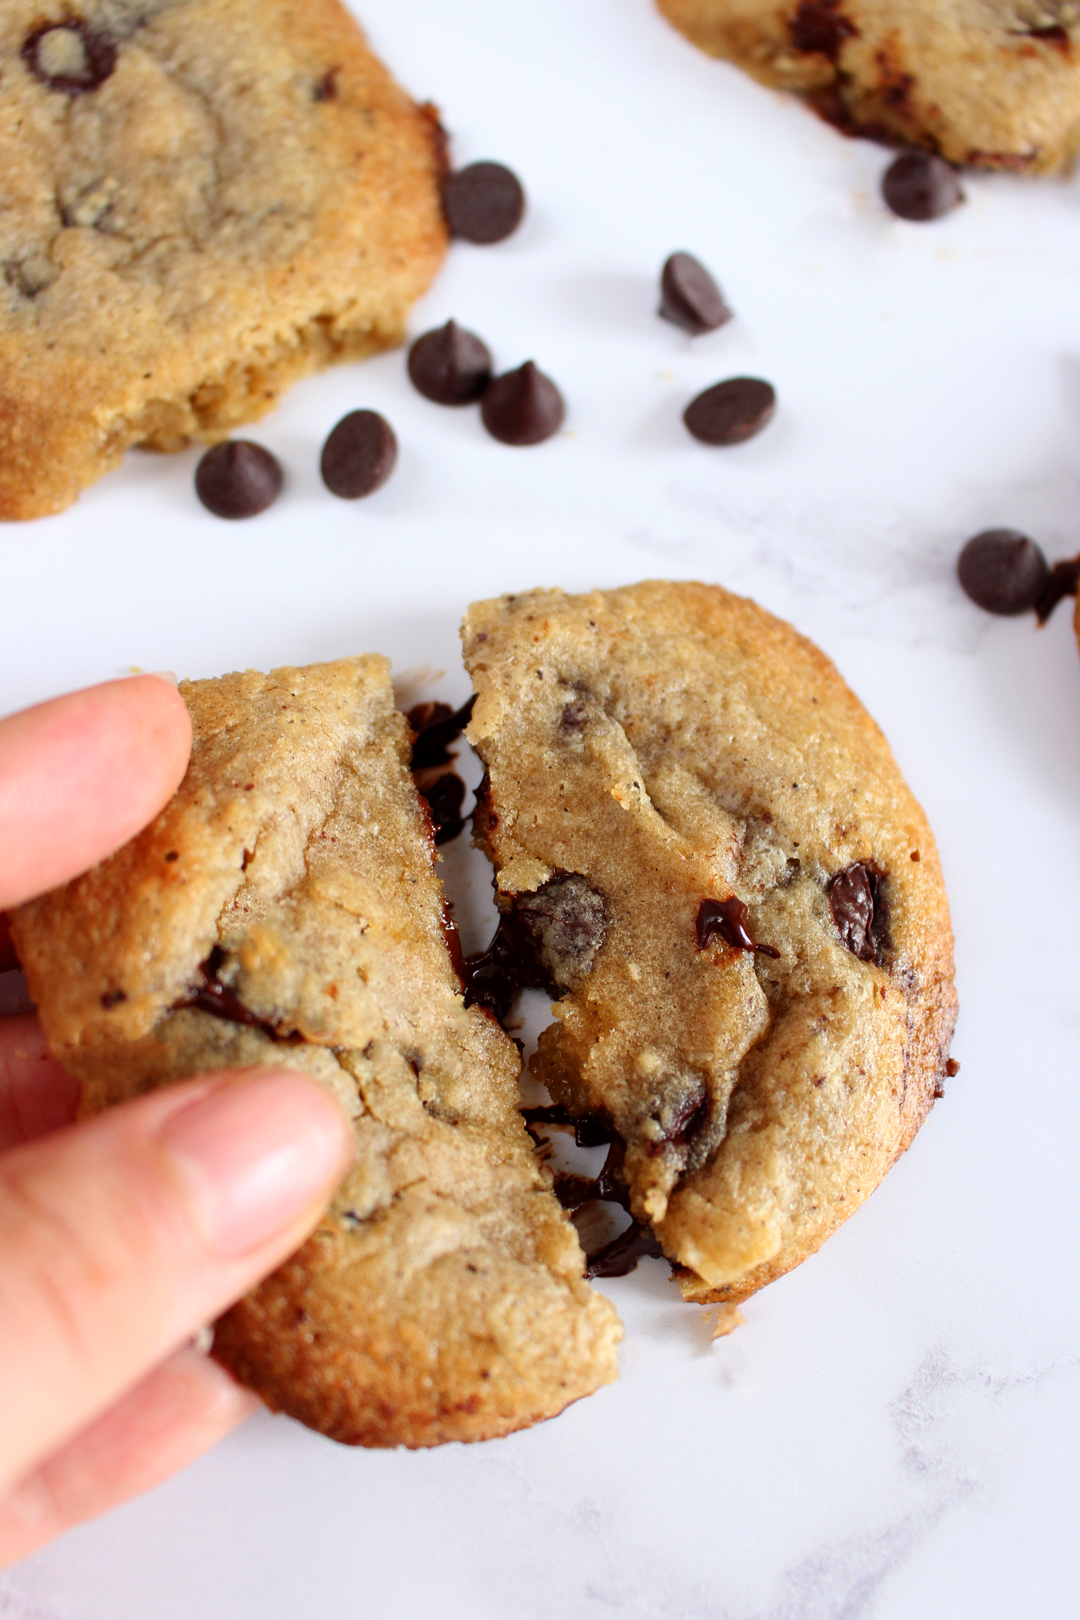 The Ultimate LOW CARB Chocolate Chip Cookies - gluten free, grain free and no added sugar!